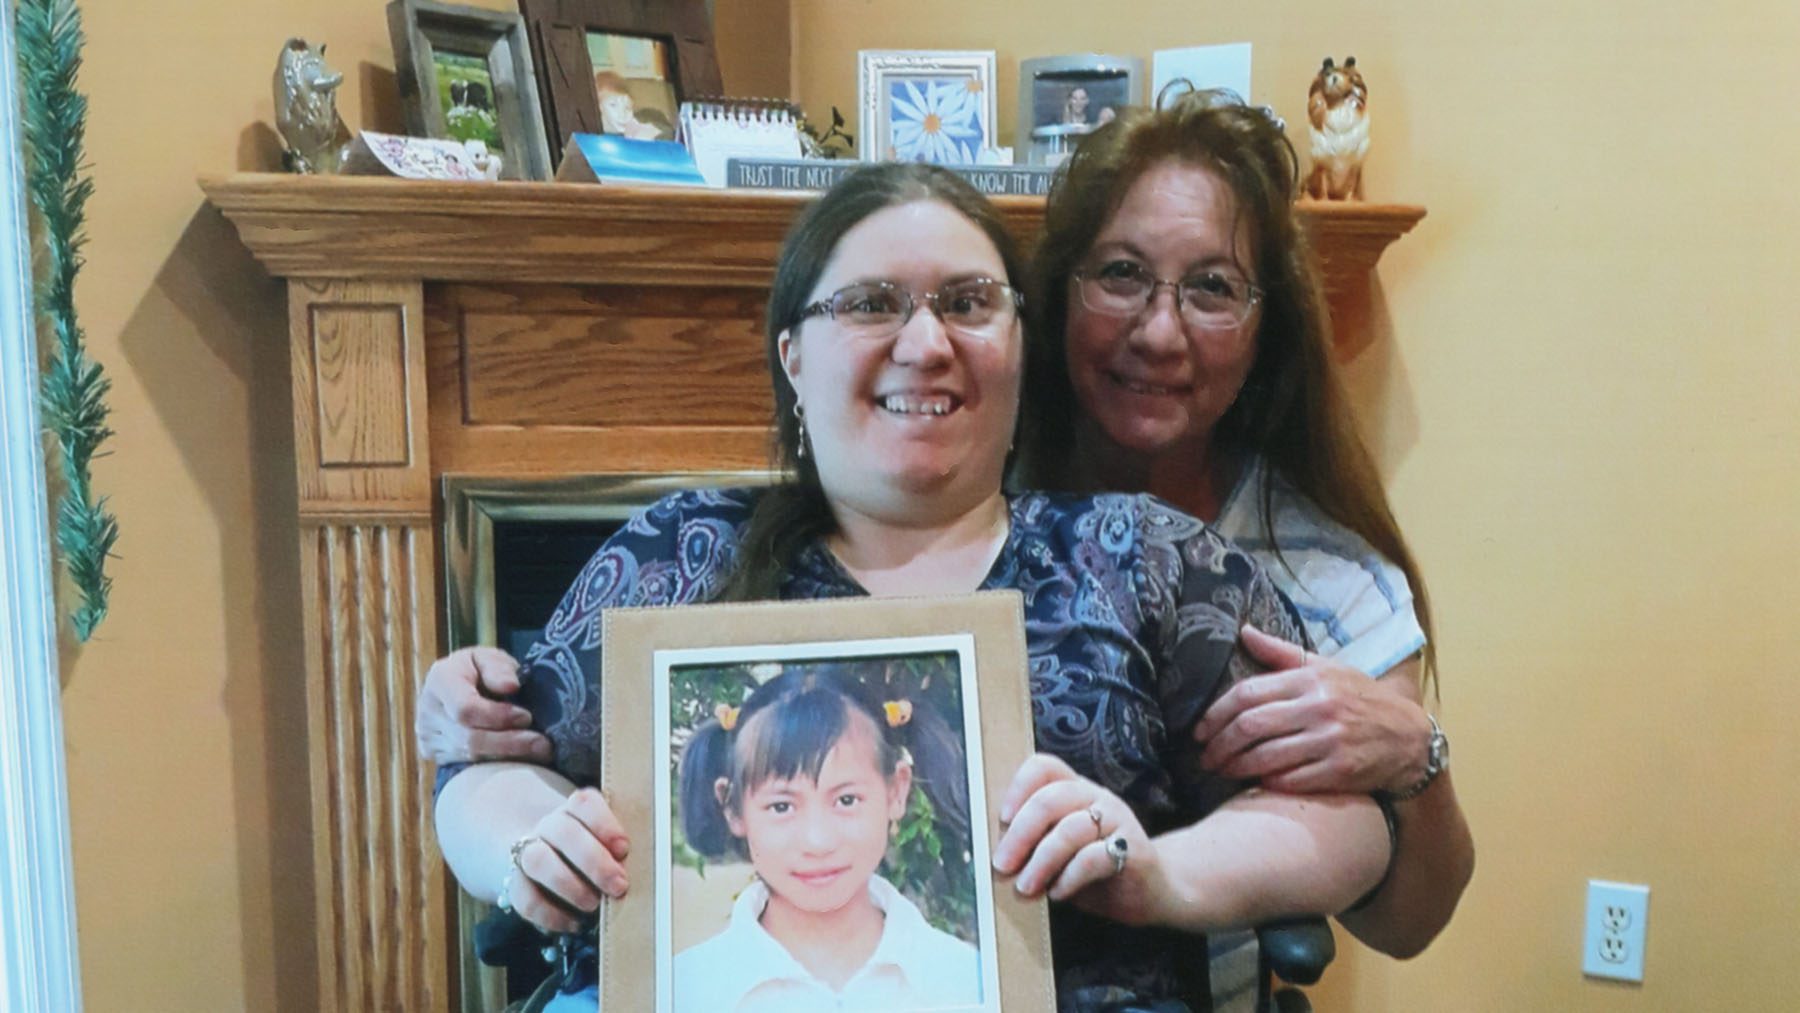 Mother and daughter in wheelchair stand in front of fireplace and hold framed picture of sponsored child